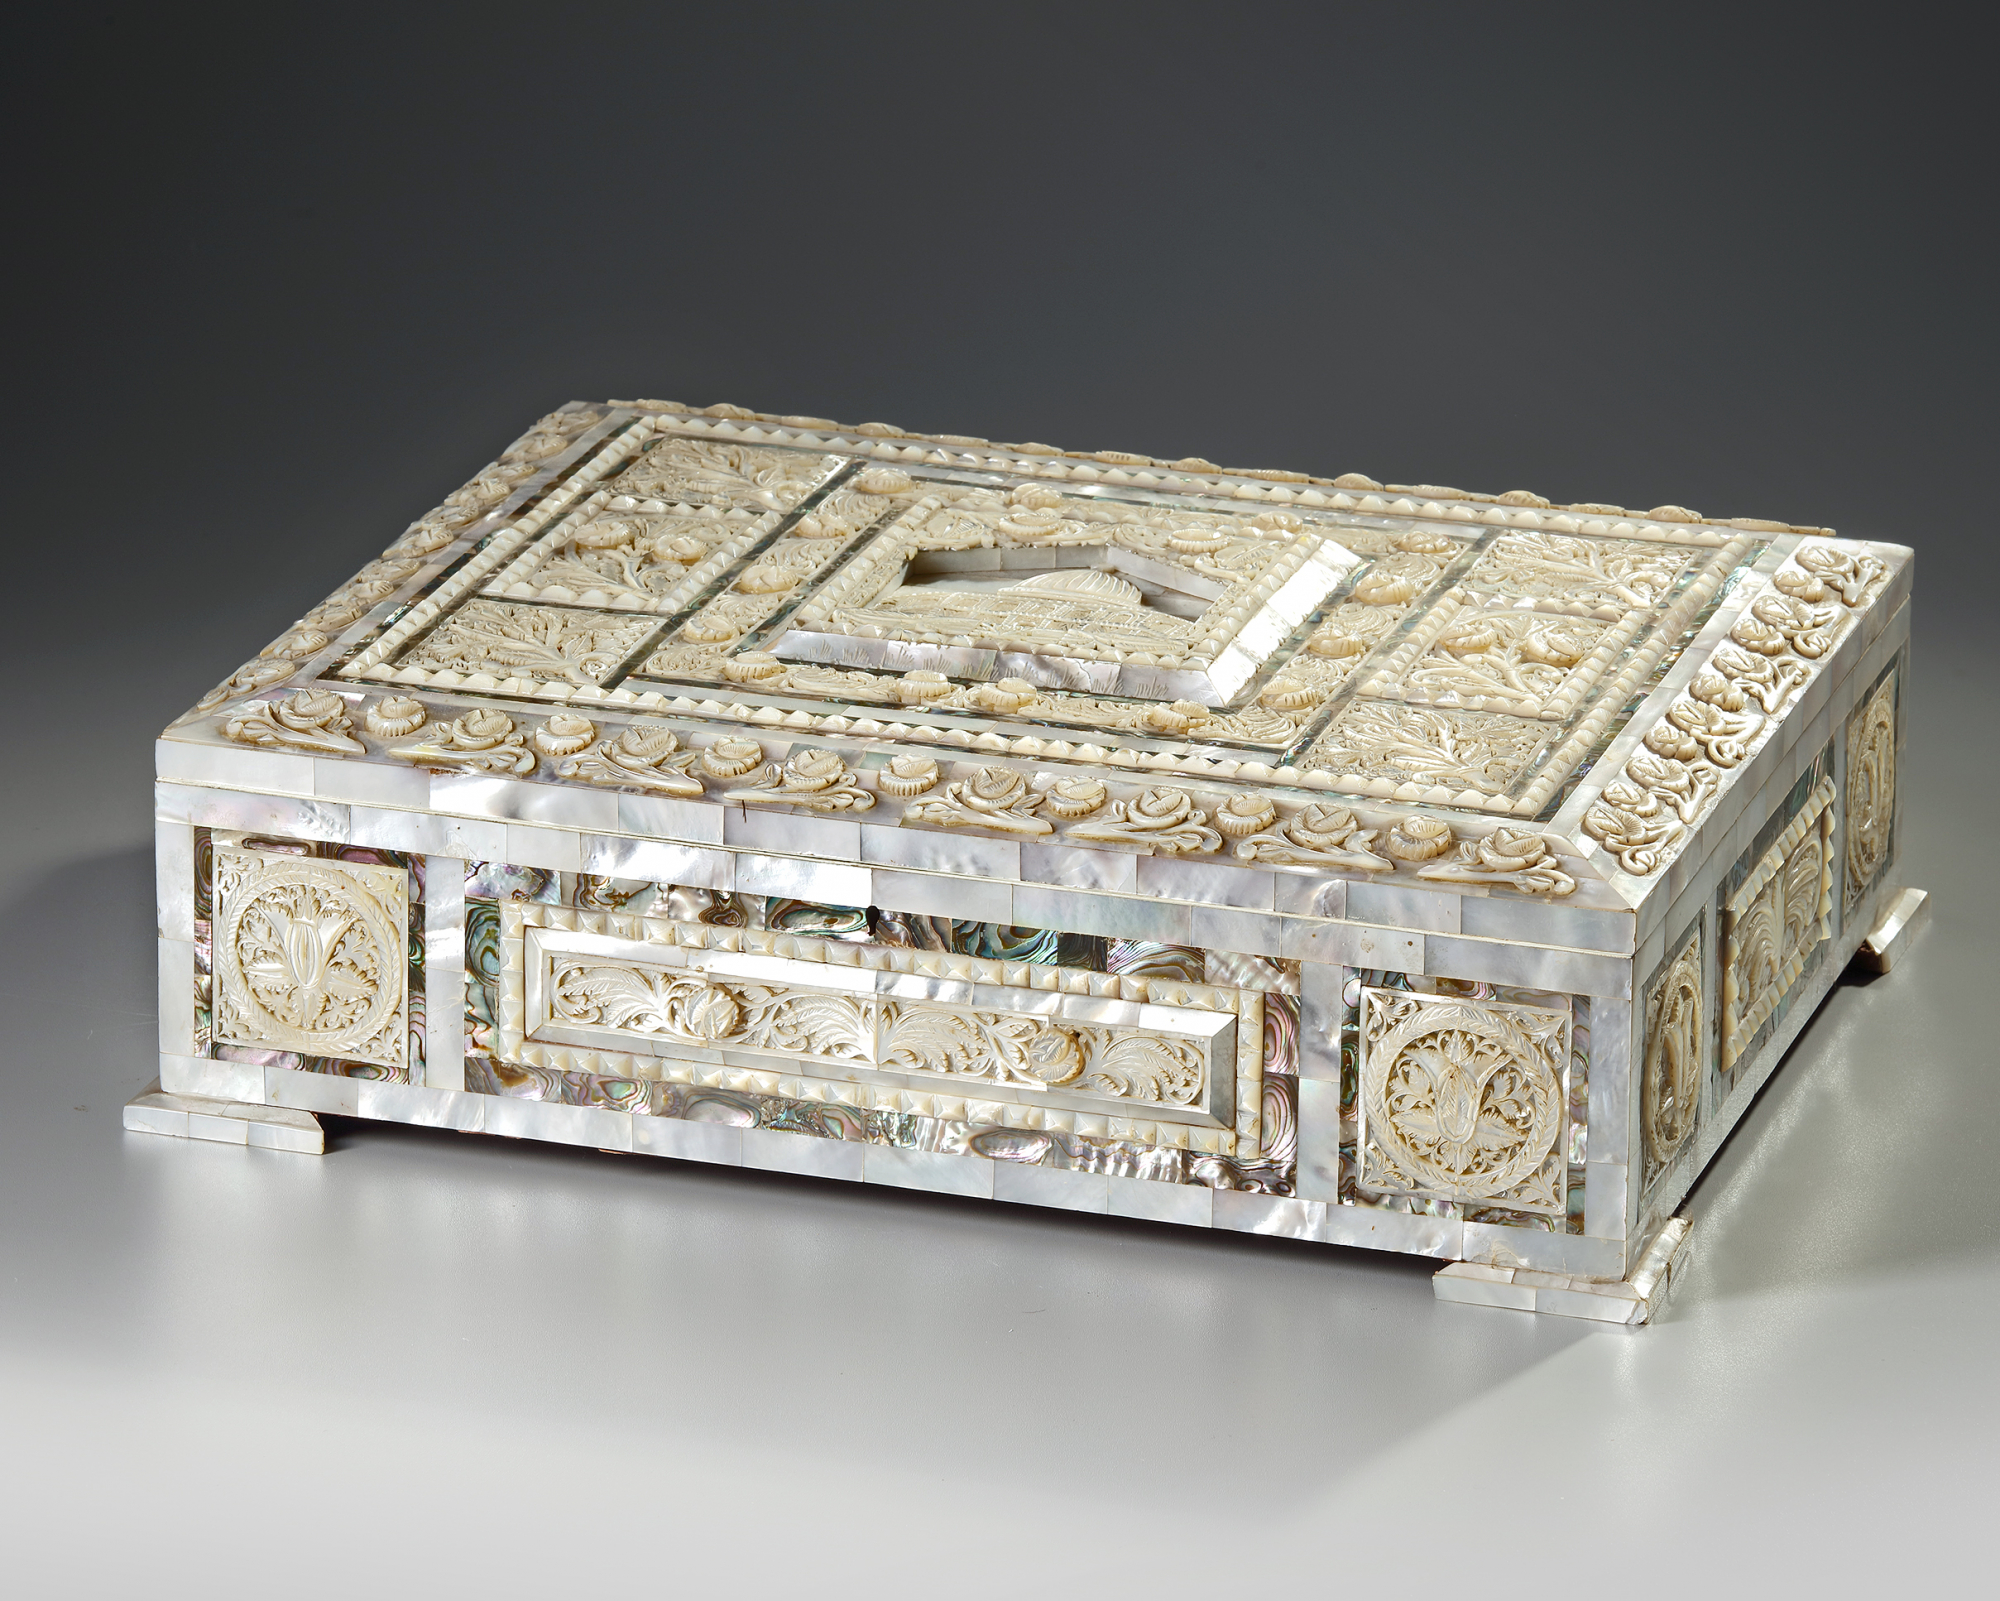 An Islamic mother-of-pearl and ivory inlaid box - Image 2 of 2